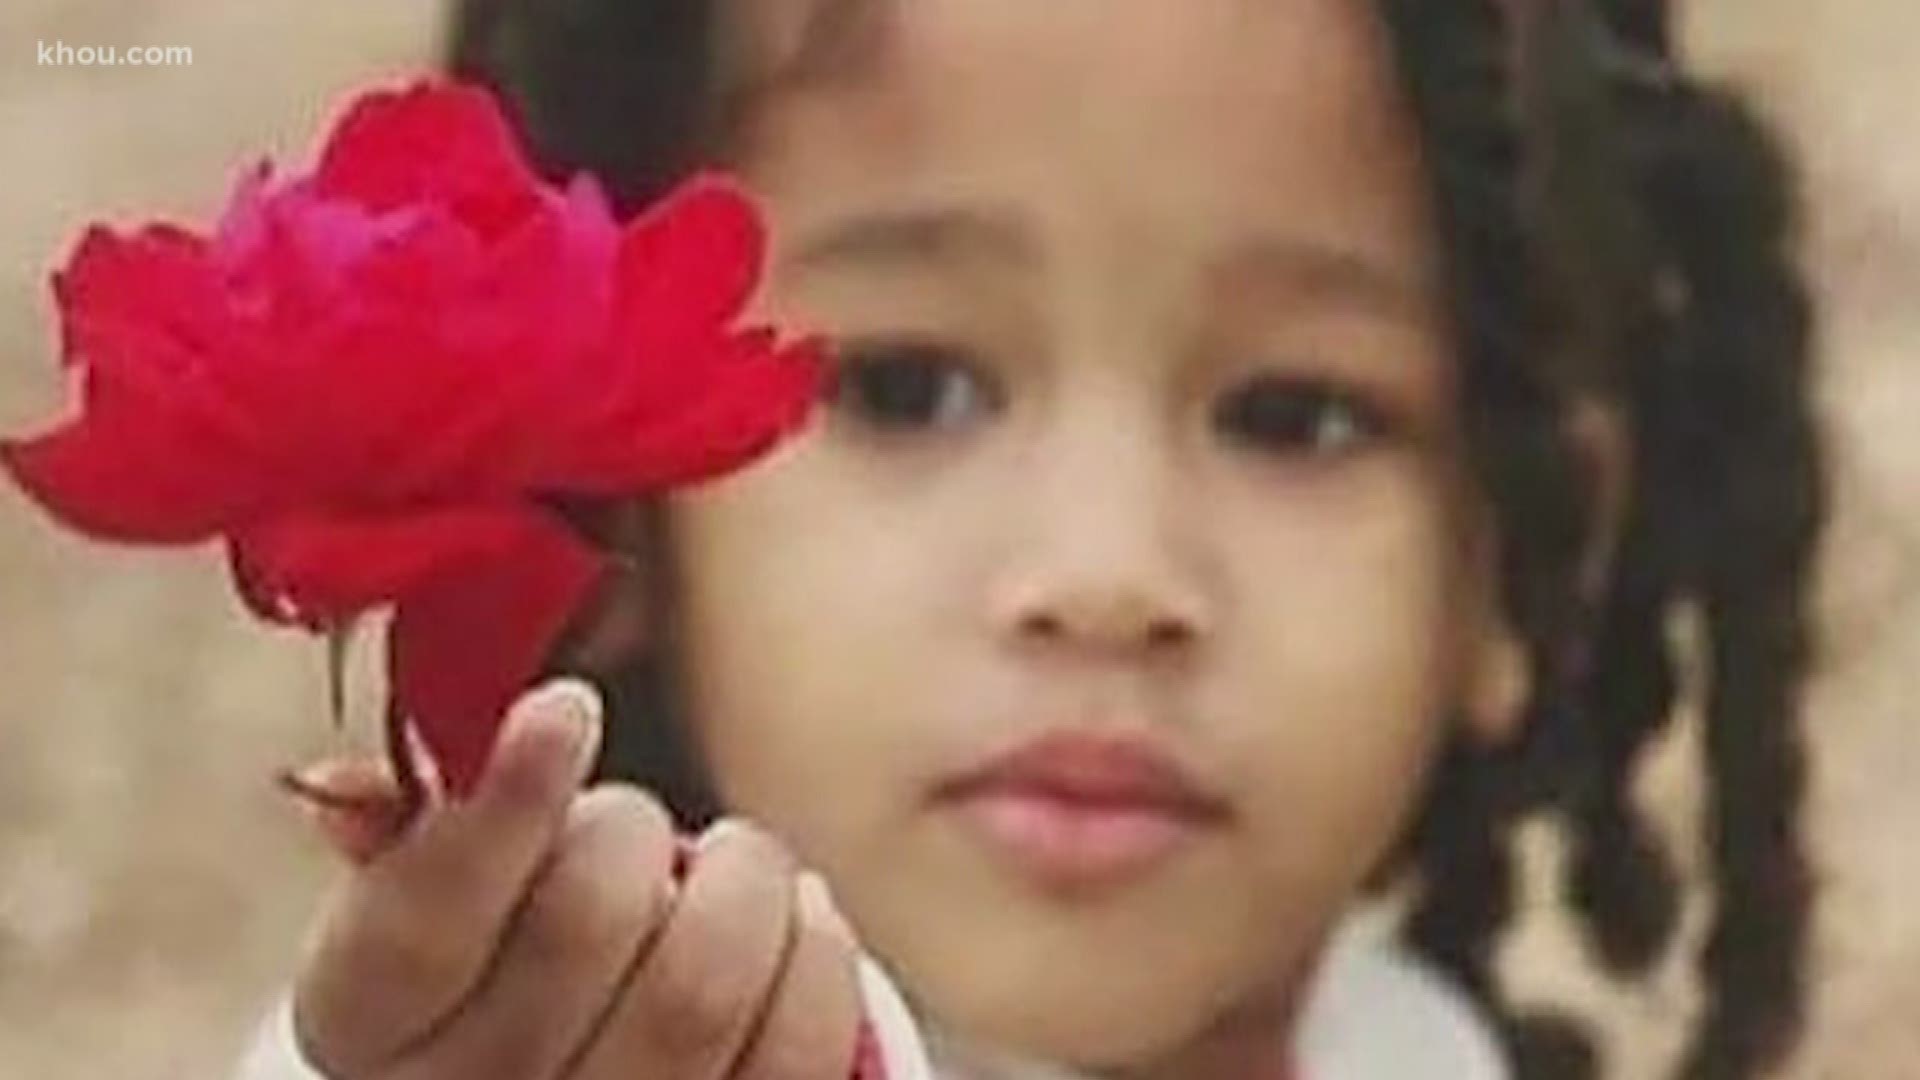 The city of Houston will get their chance to pay their respects to Maleah Davis Sunday. She’s the little four year old girl who’s captured our hearts and brought the entire country to tears.